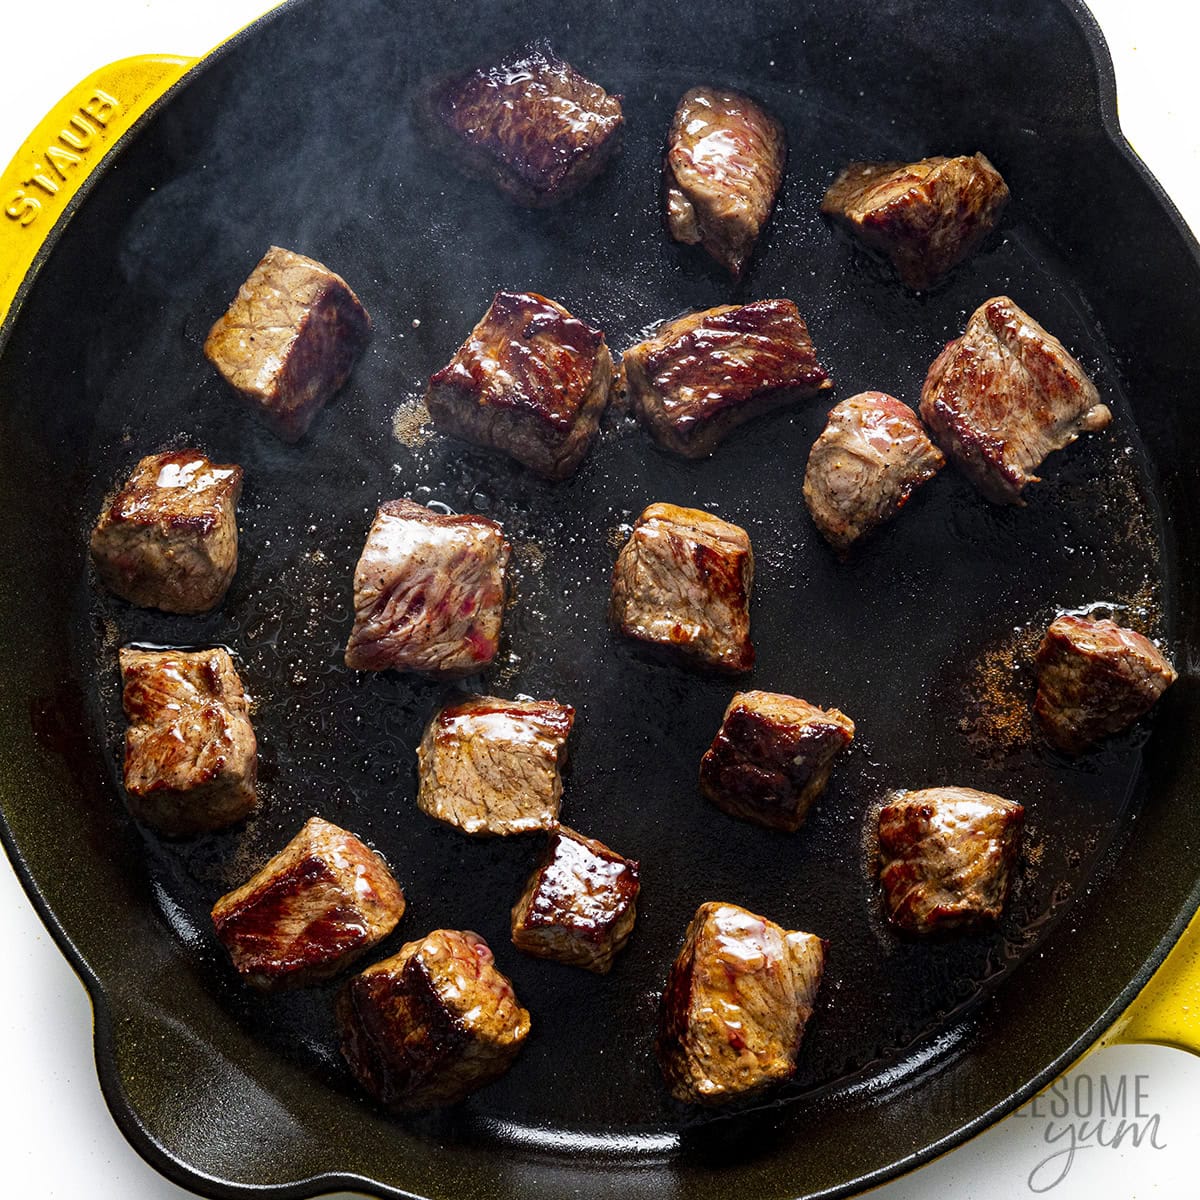 Steak bites seared on all sides in a cast iron skillet.